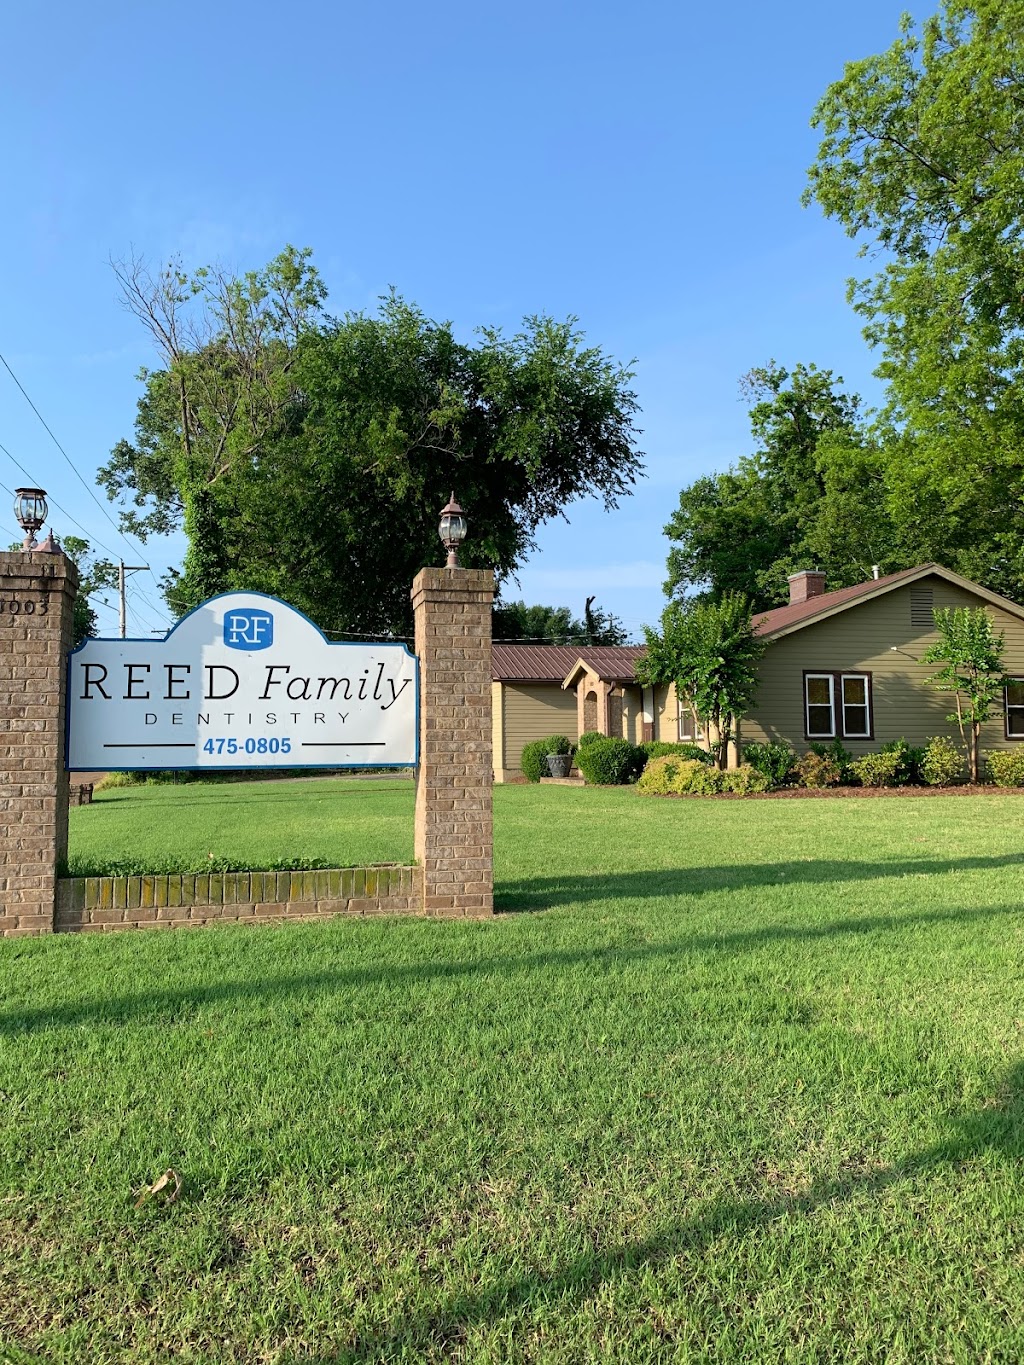 Reed Family Dentistry | 1003 S College St, Covington, TN 38019 | Phone: (901) 475-0805